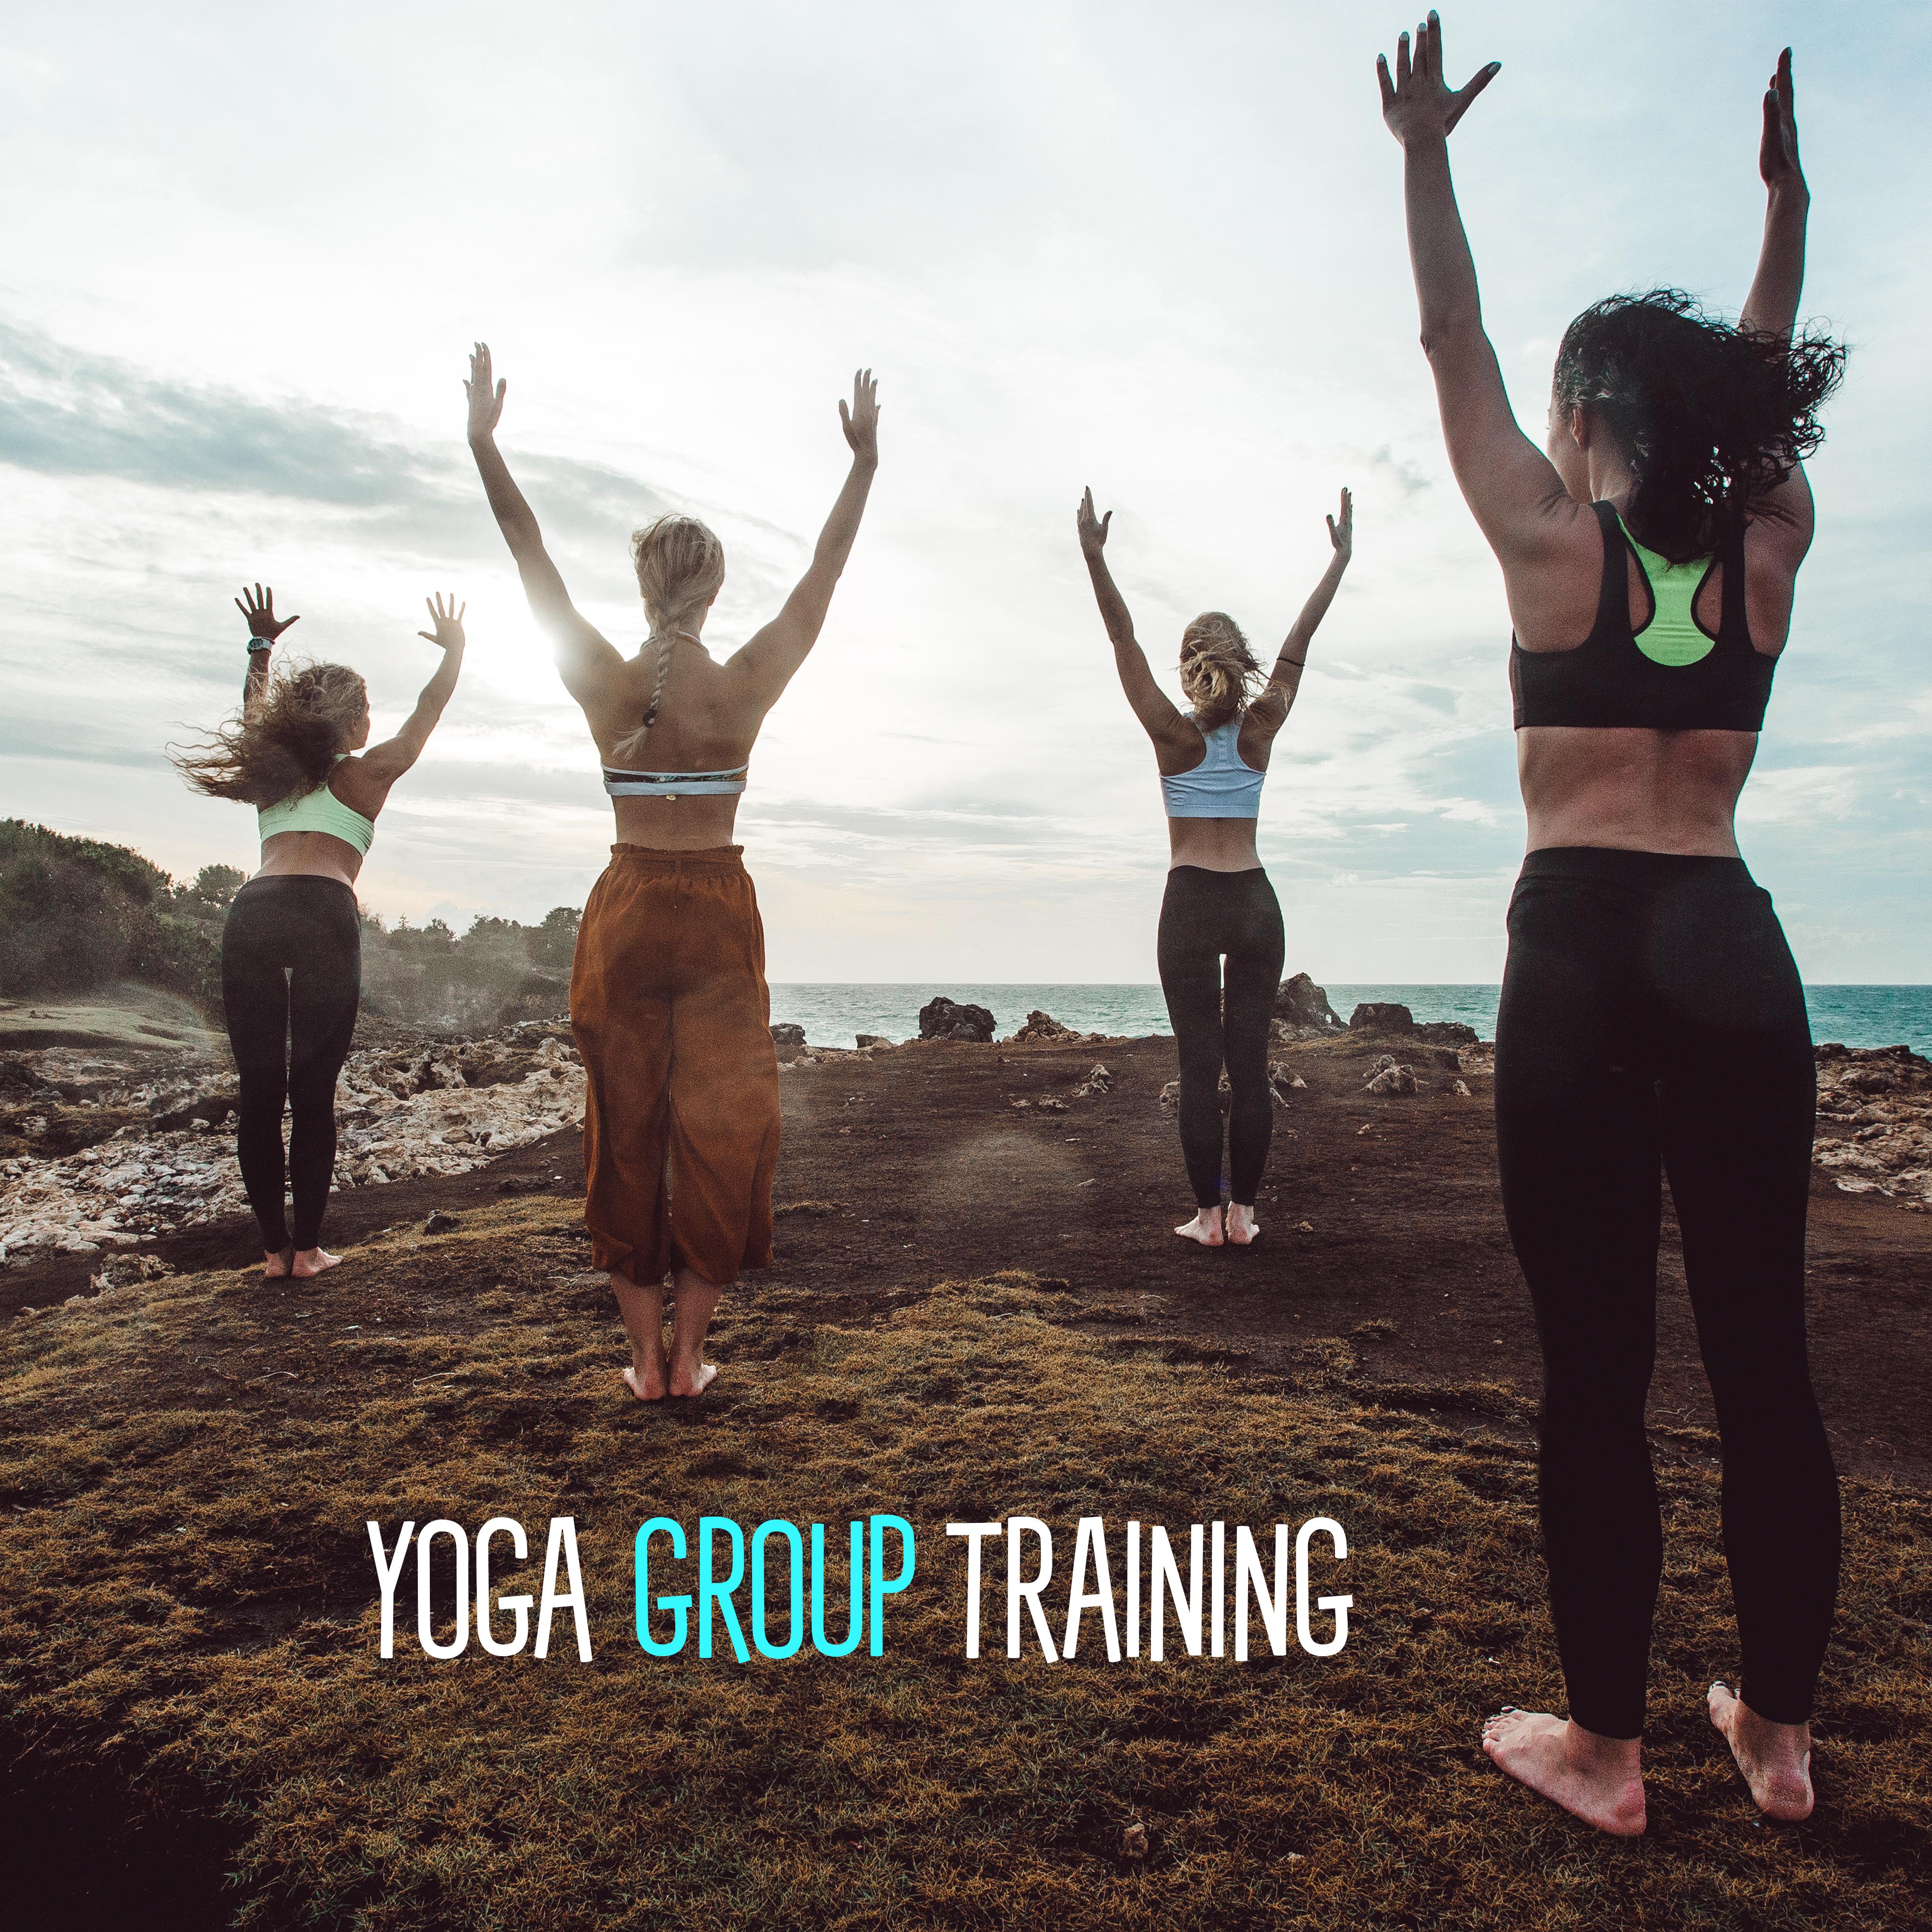 Yoga Group Training: 2019 New Age Music Compilation for Yoga Center; Group Meditation & Relaxation Therapy, Train All Yoga Poses, Body & Mind Relax